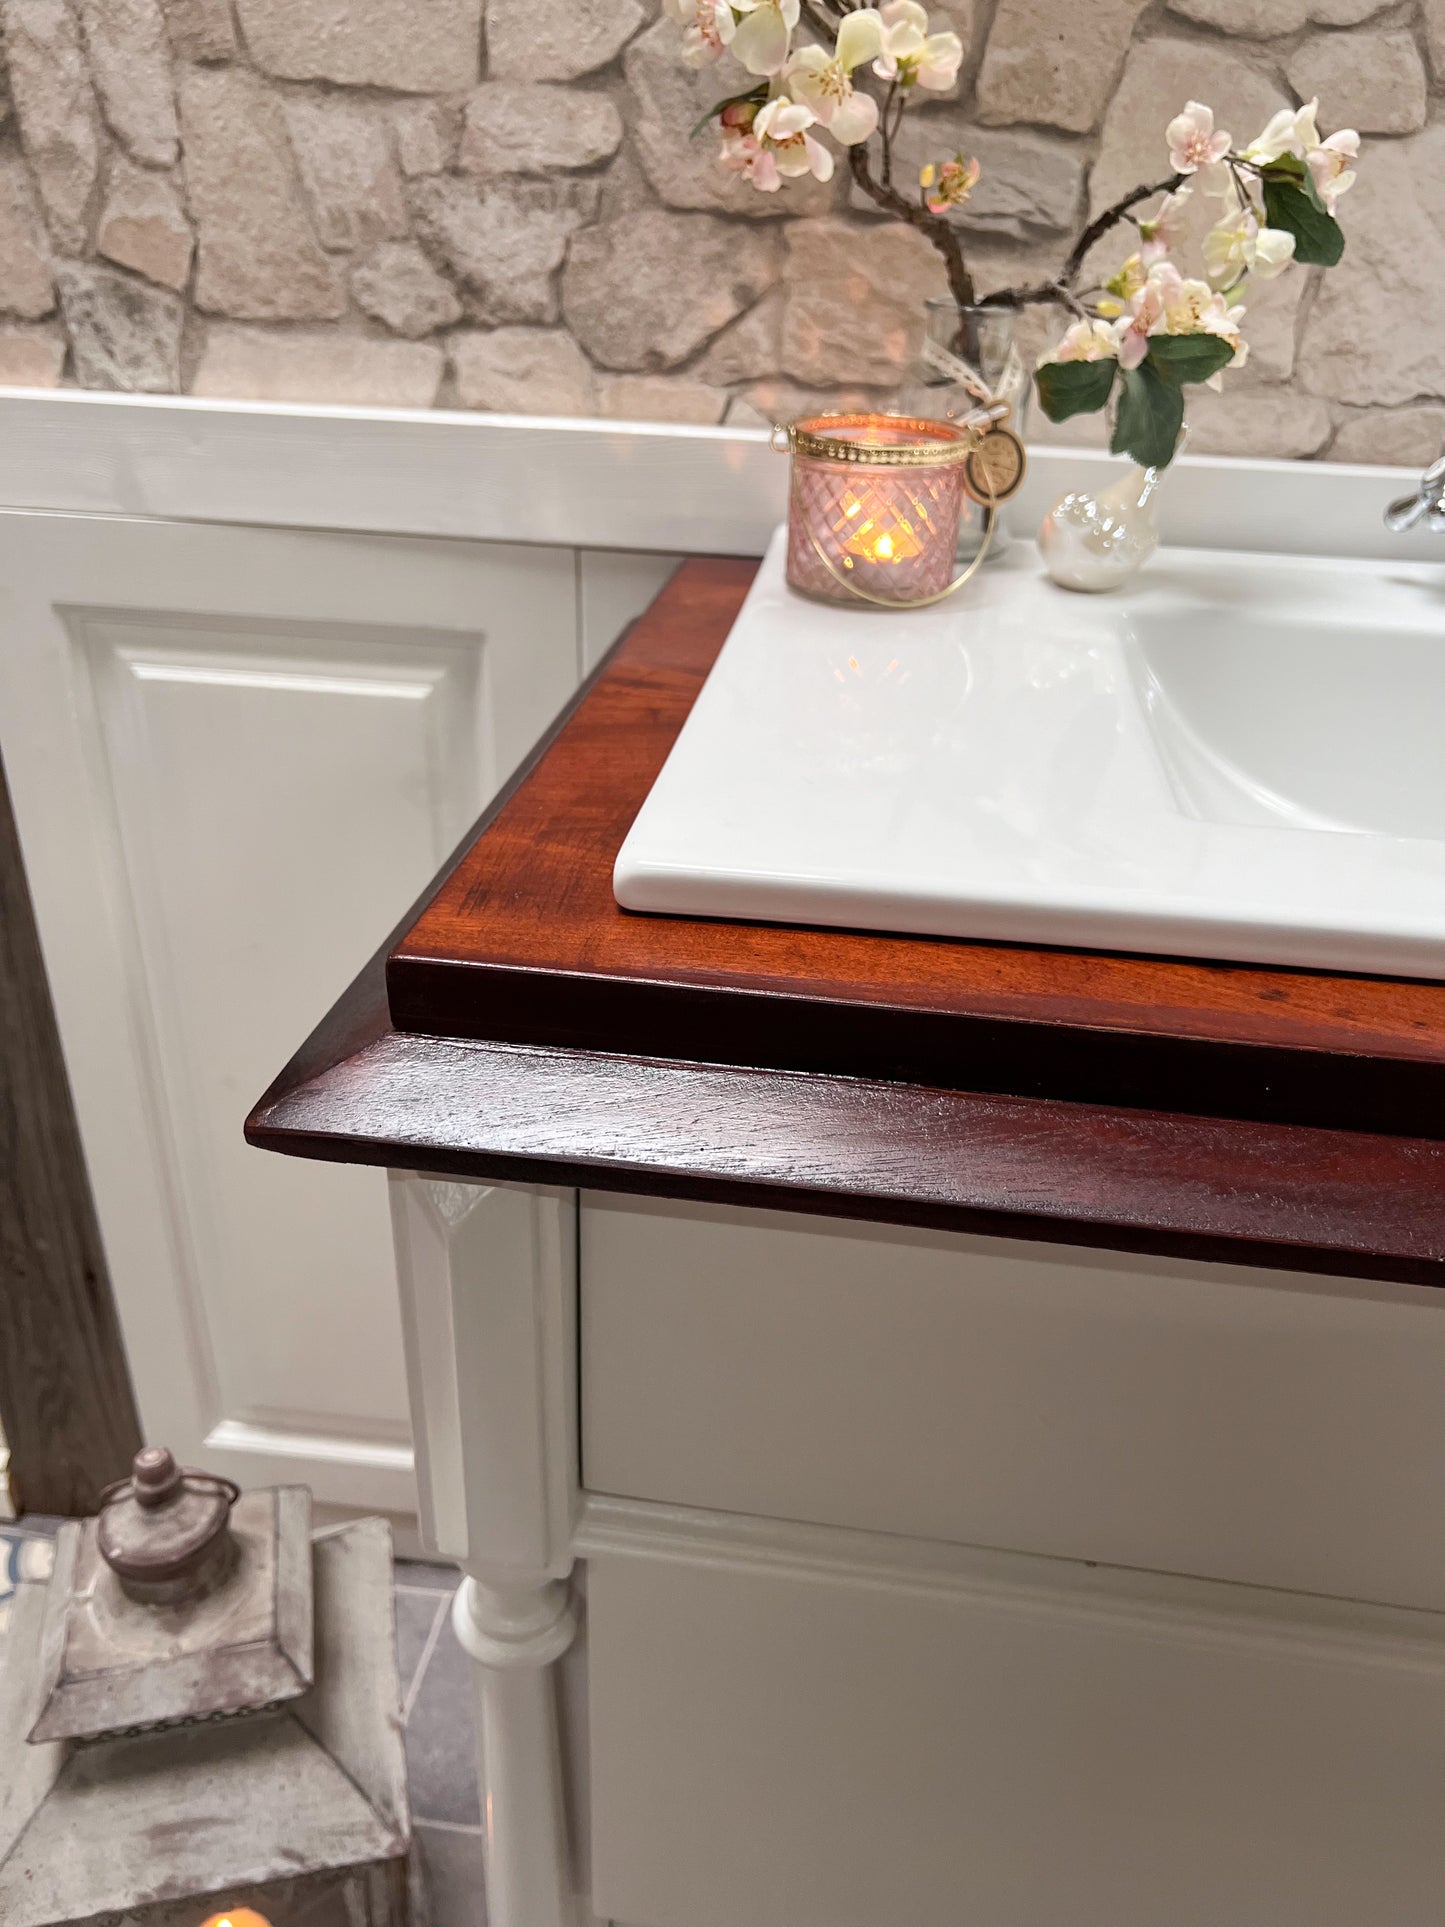 "Irès" - Country house washbasin with drawers